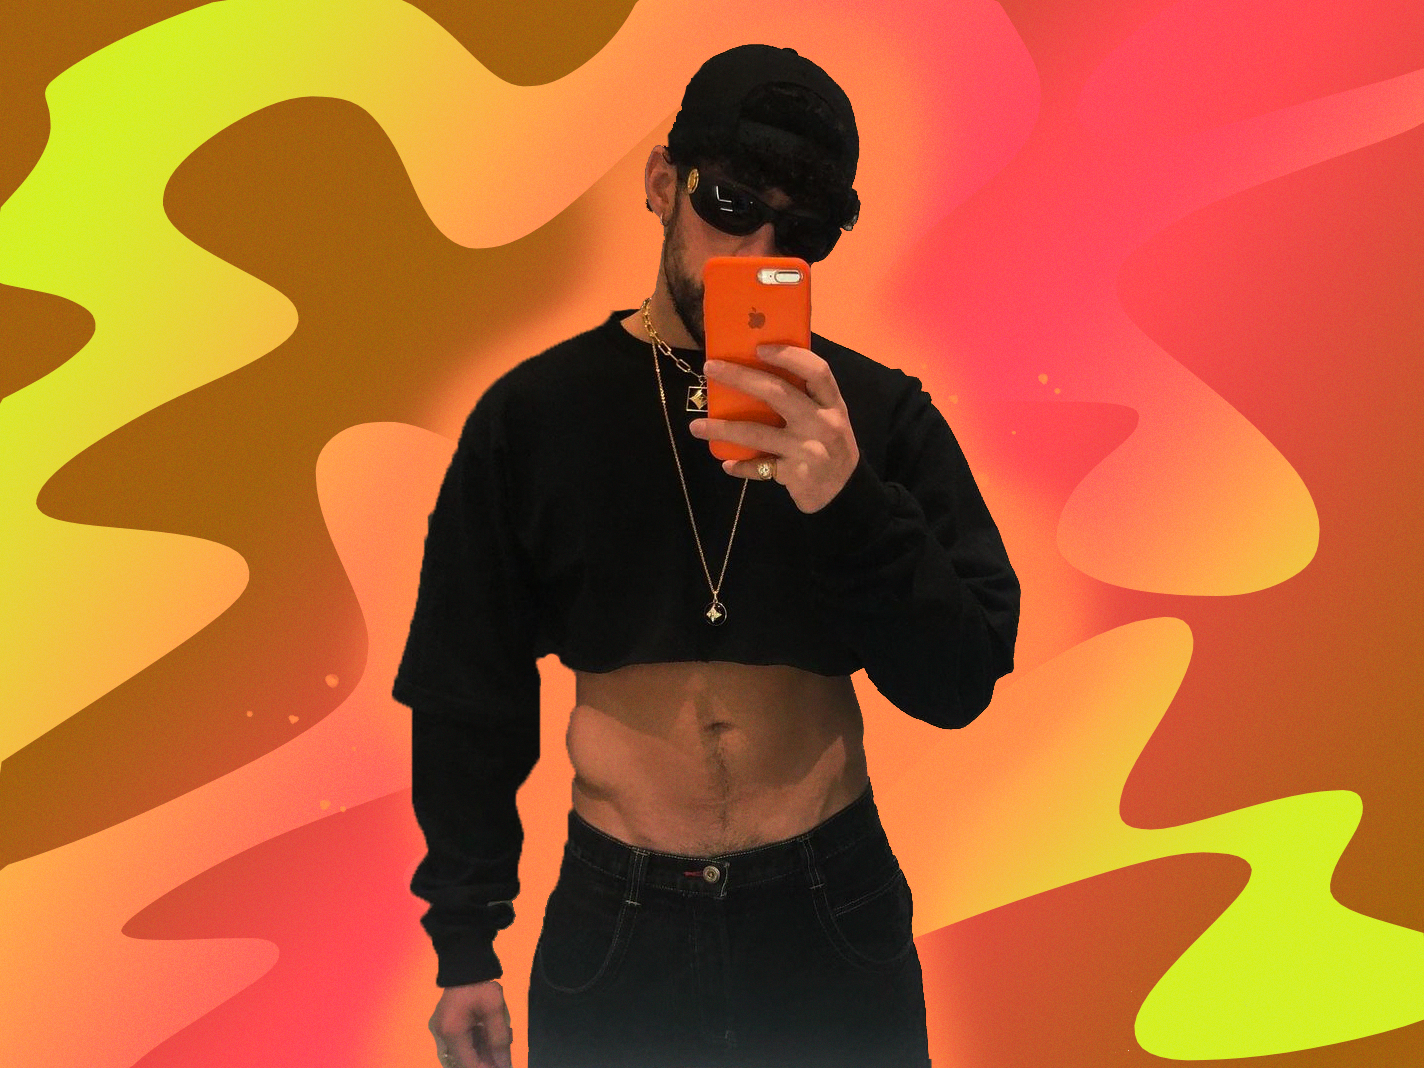 Here Are Some Thirsty & Funny Memes Inspired by Bad Bunny's Crop Top  Instagram Selfie Photo